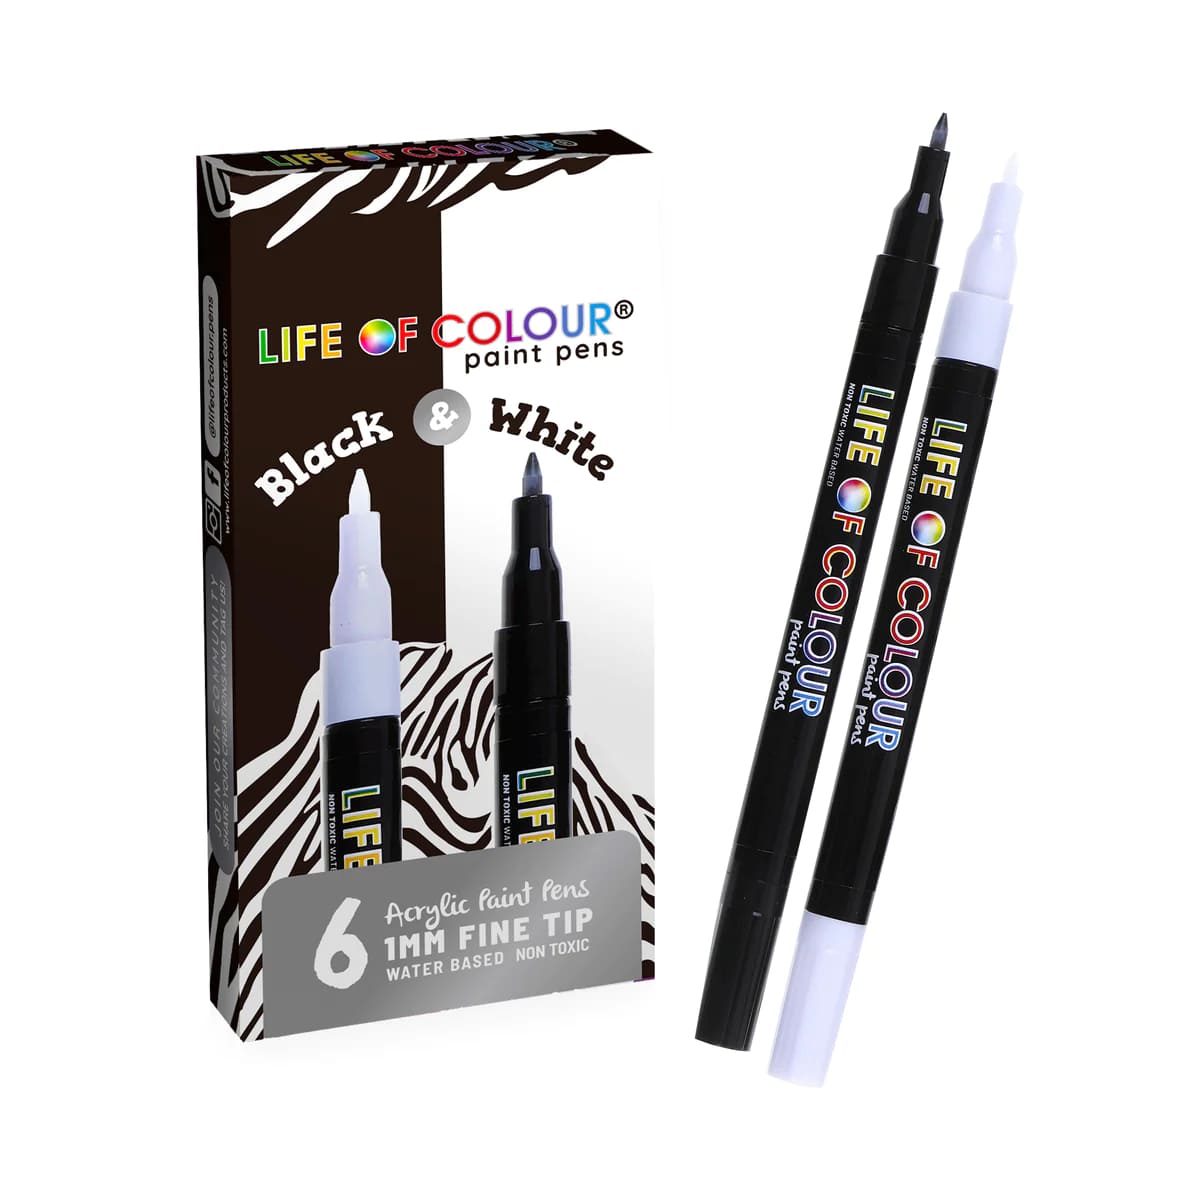 Life of Colour Black and White 1mm Fine Tip Acrylic Paint Pens